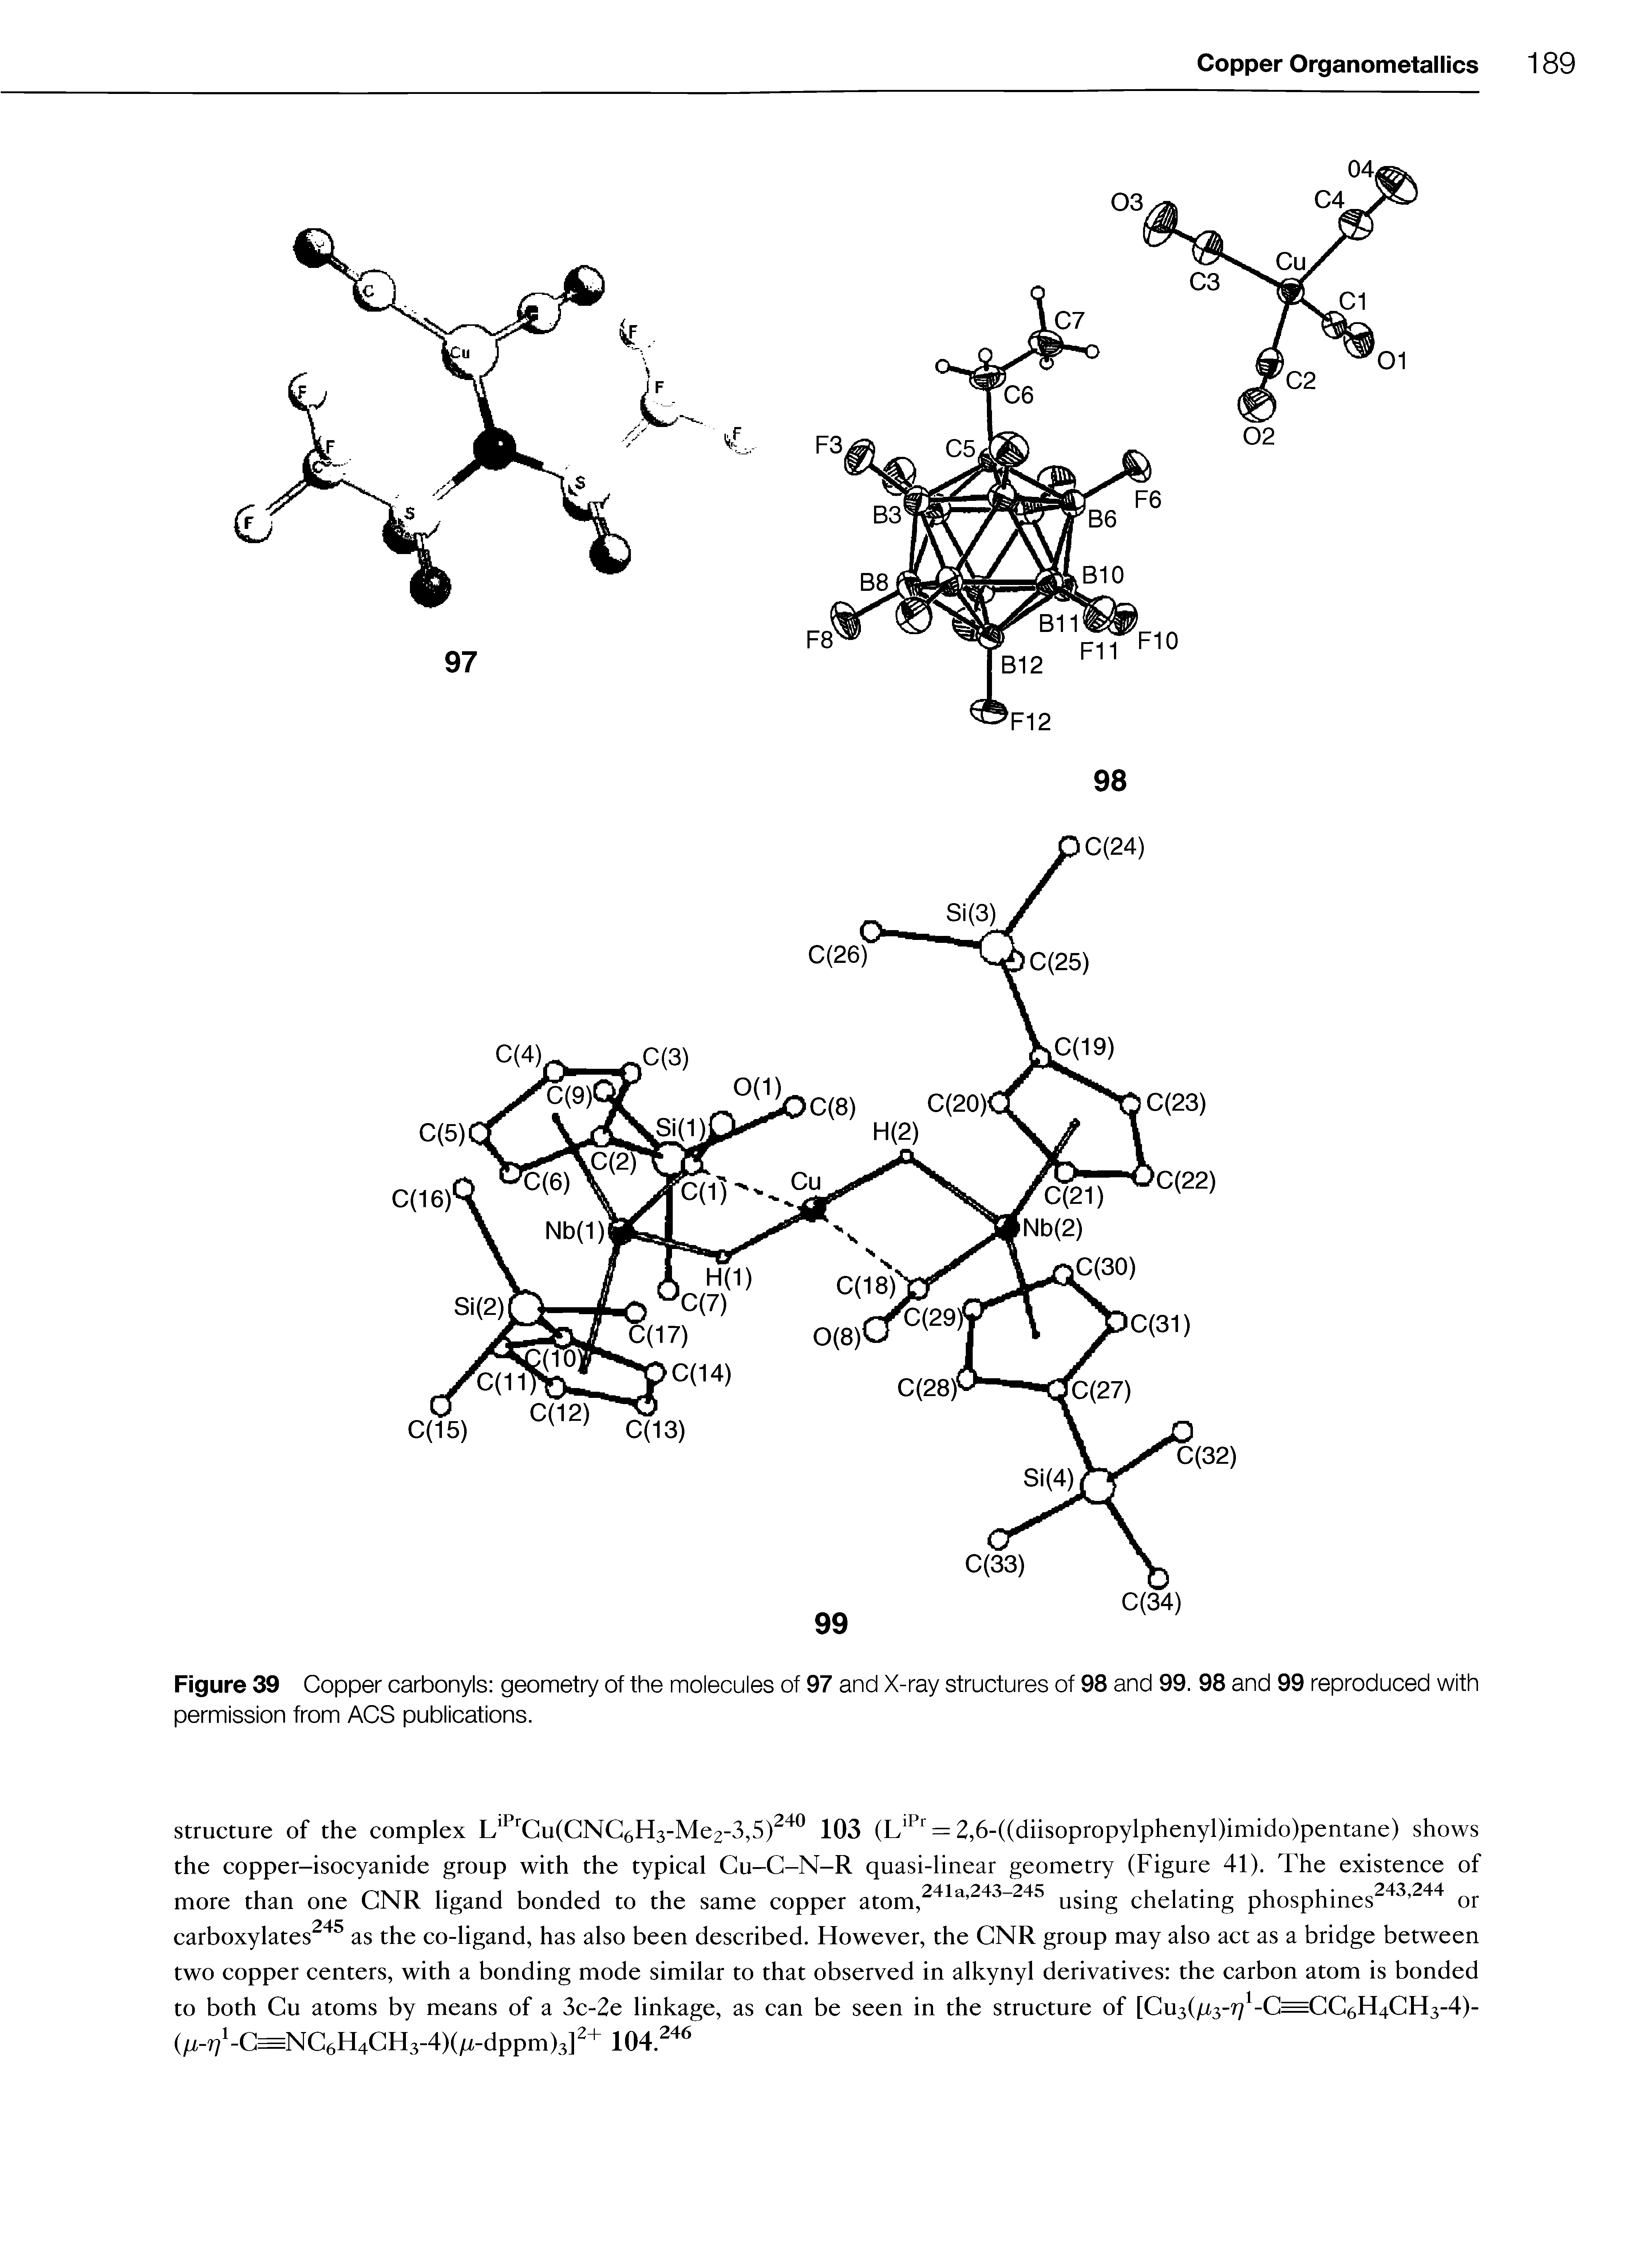 Figure 39 Copper carbonyls geometry of the molecules of 97 and X-ray structures of 98 and 99. 98 and 99 reproduced with permission from ACS publications.